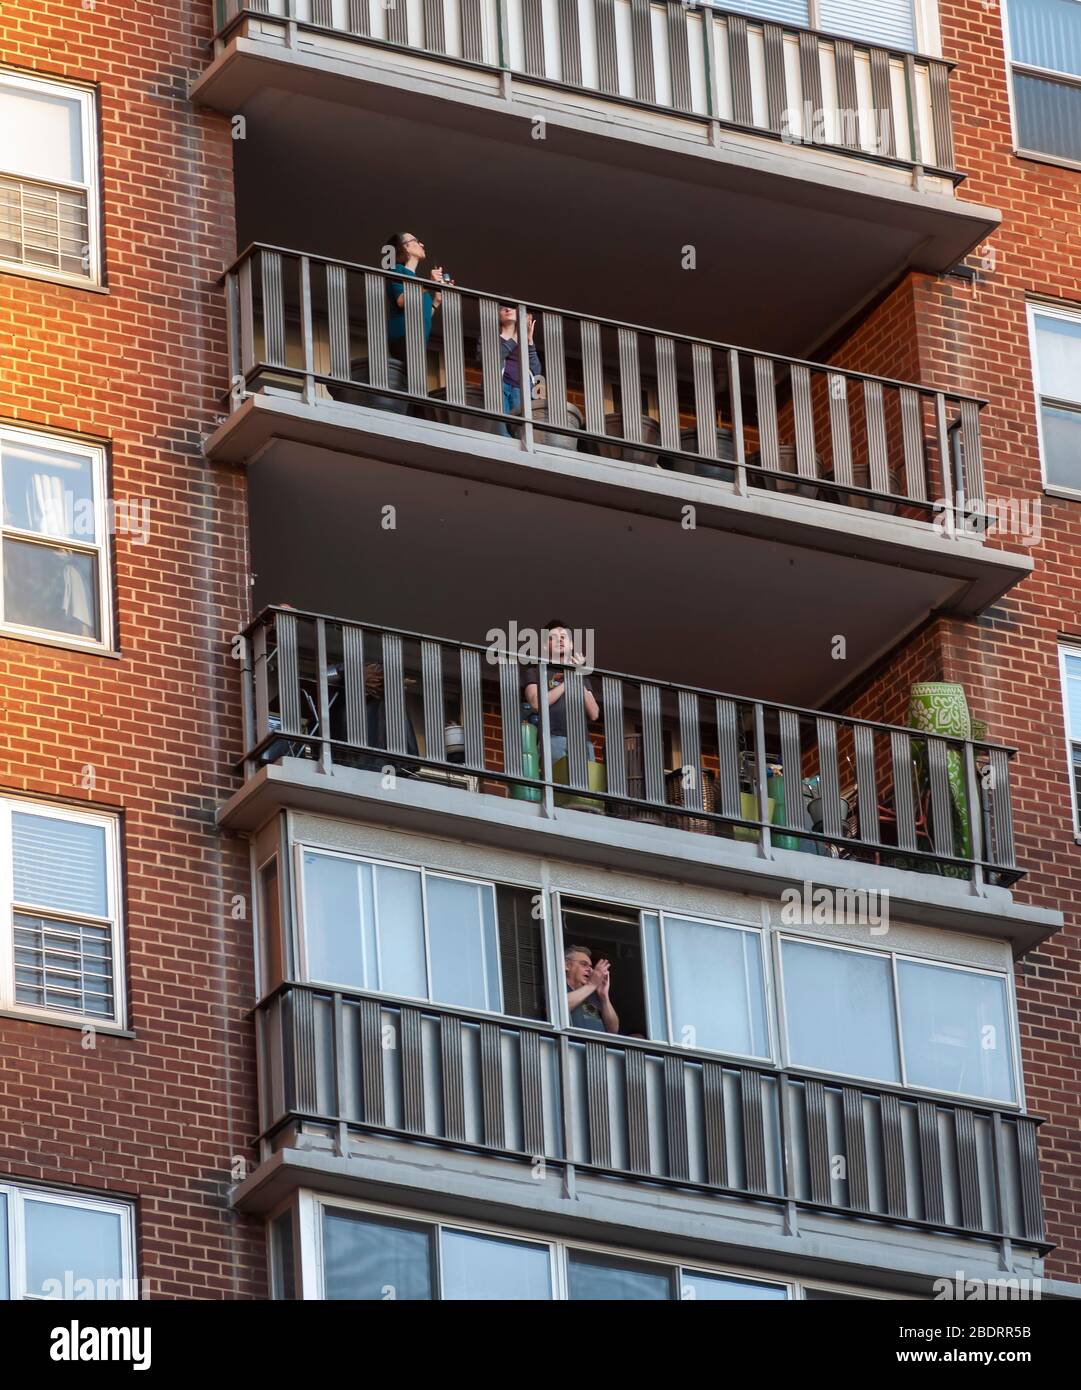 People applaud healthcare workers from their balconies in an apartment building in Chelsea in New York on Wednesday, April 8, 2020. At 7:00 PM every night New Yorkers scream, bang pots, blow whistles, etc. to make noise to show their support for healthcare workers on the frontlines in the COVID-19 pandemic. (© Richard B. Levine) Stock Photo